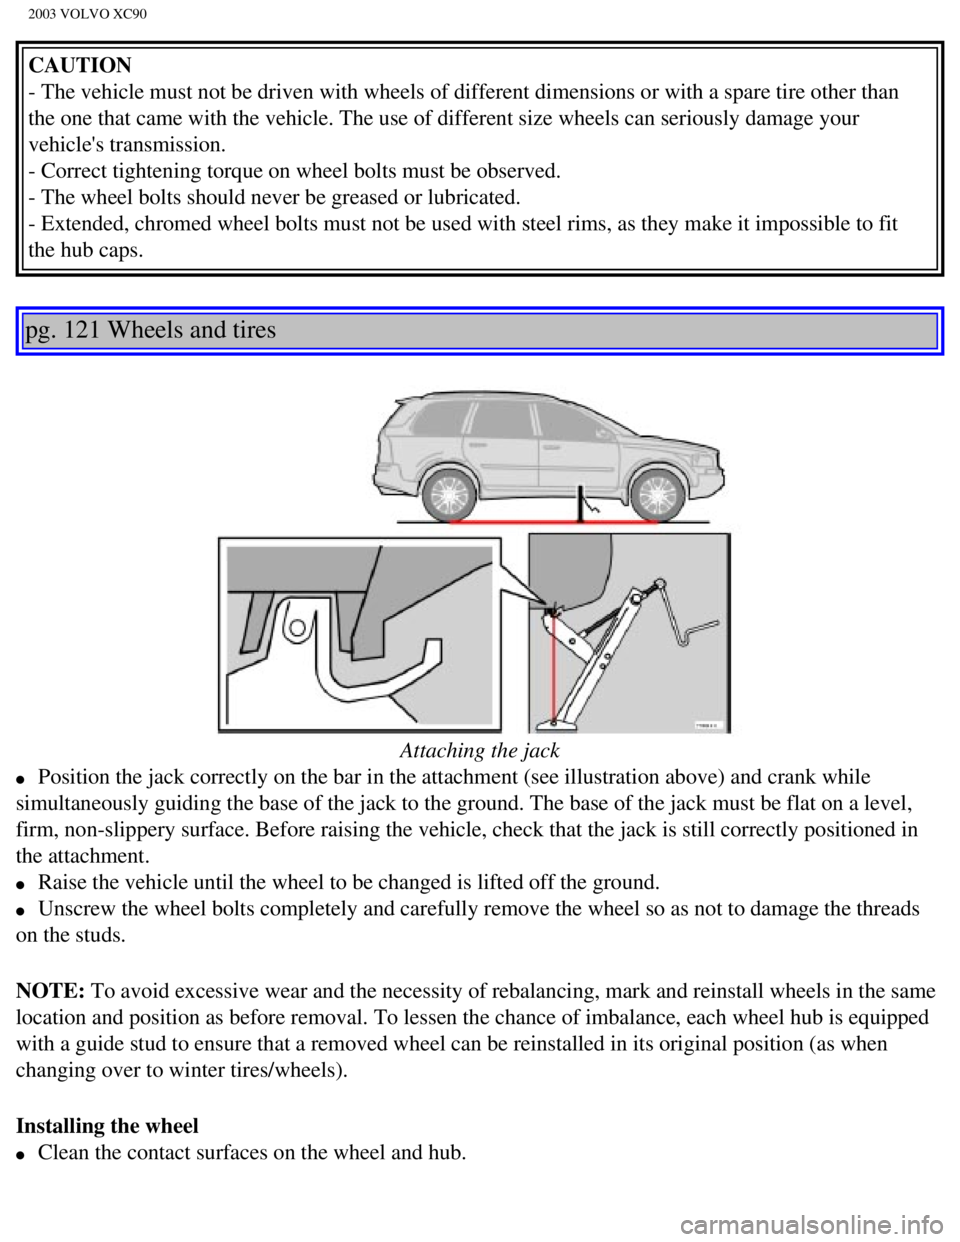 VOLVO XC90 2003  Owners Manual 
2003 VOLVO XC90
CAUTION 
- The vehicle must not be driven with wheels of different dimensions or \
with a spare tire other than 
the one that came with the vehicle. The use of different size wheels c